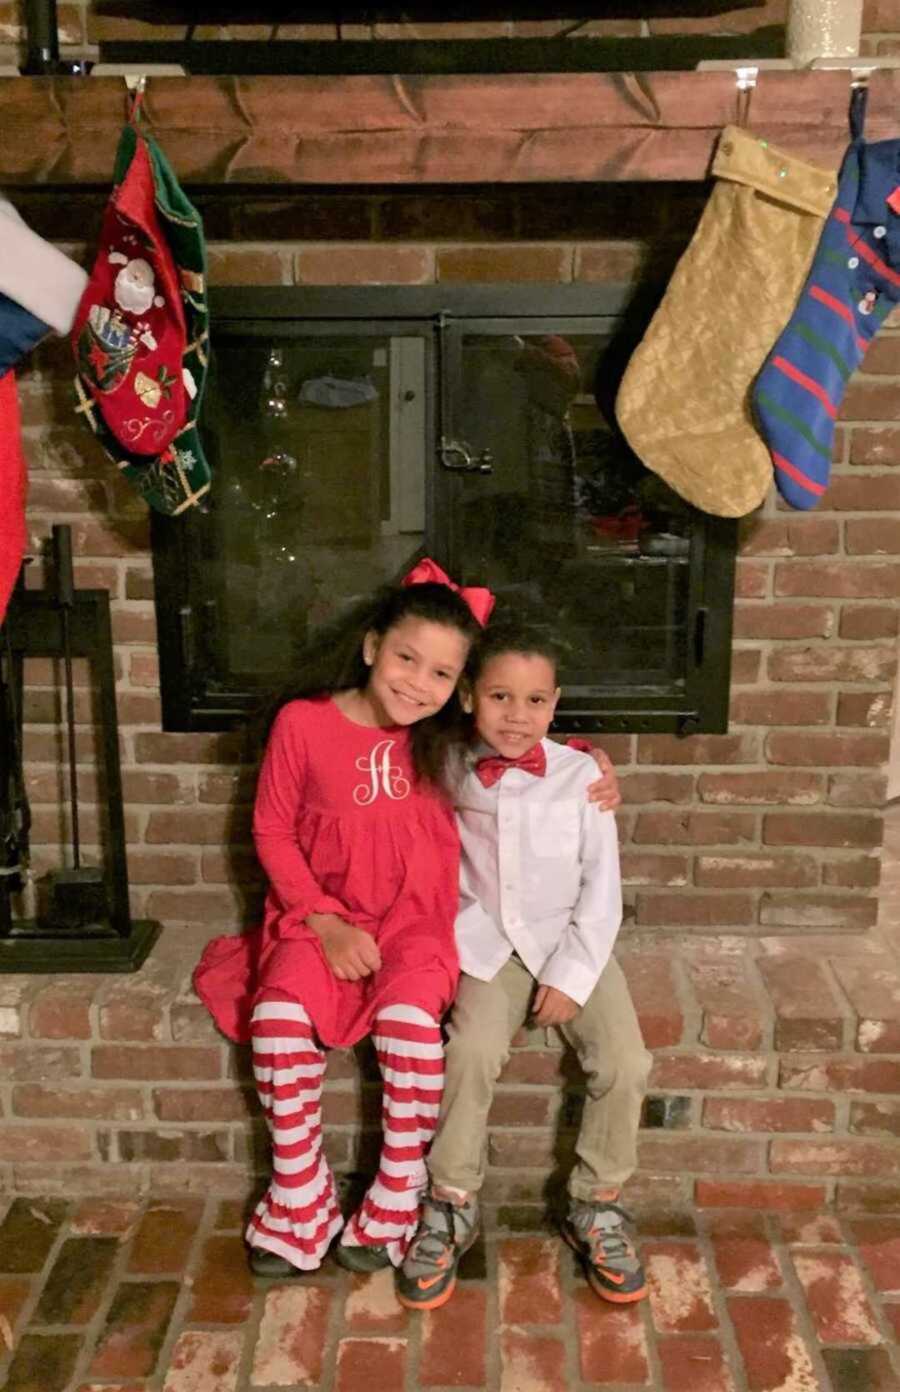 Foster siblings smiling next to fireplace